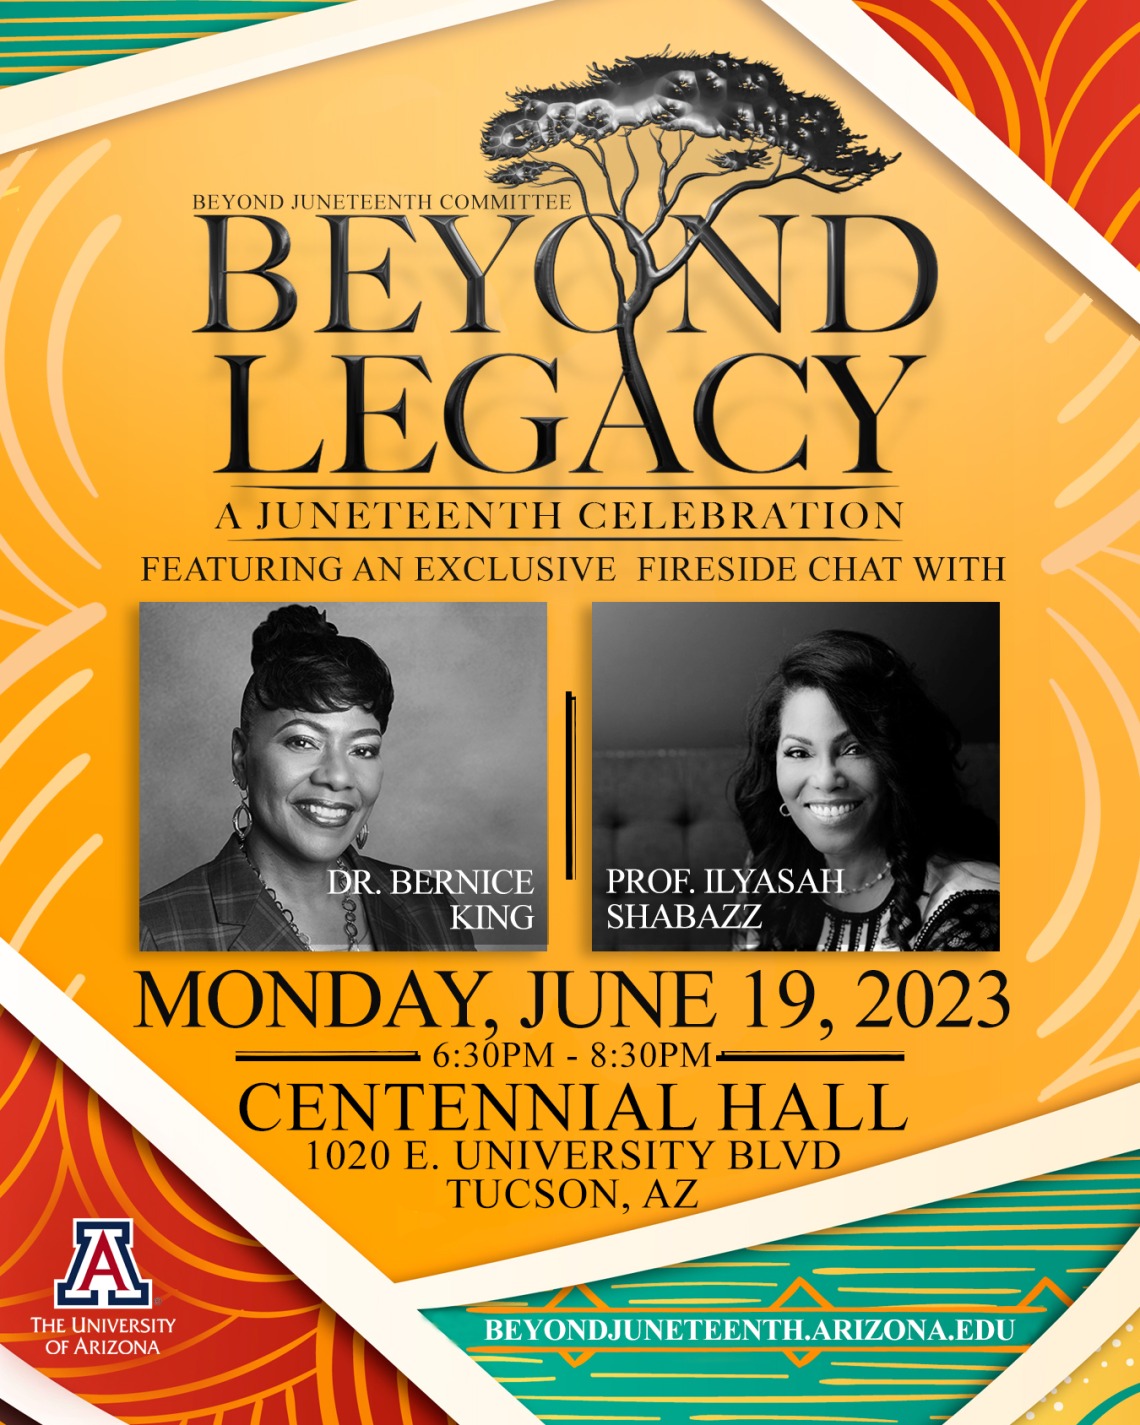 Beyond Legacy event flyer with a yellow background featuring the image of Dr. Bernice King and Professor Ilyasah Shabazz. Event information is included- Monday, June 19th, 2023 at 7:00 in the evening. Doors open to the public at 6:30pm.